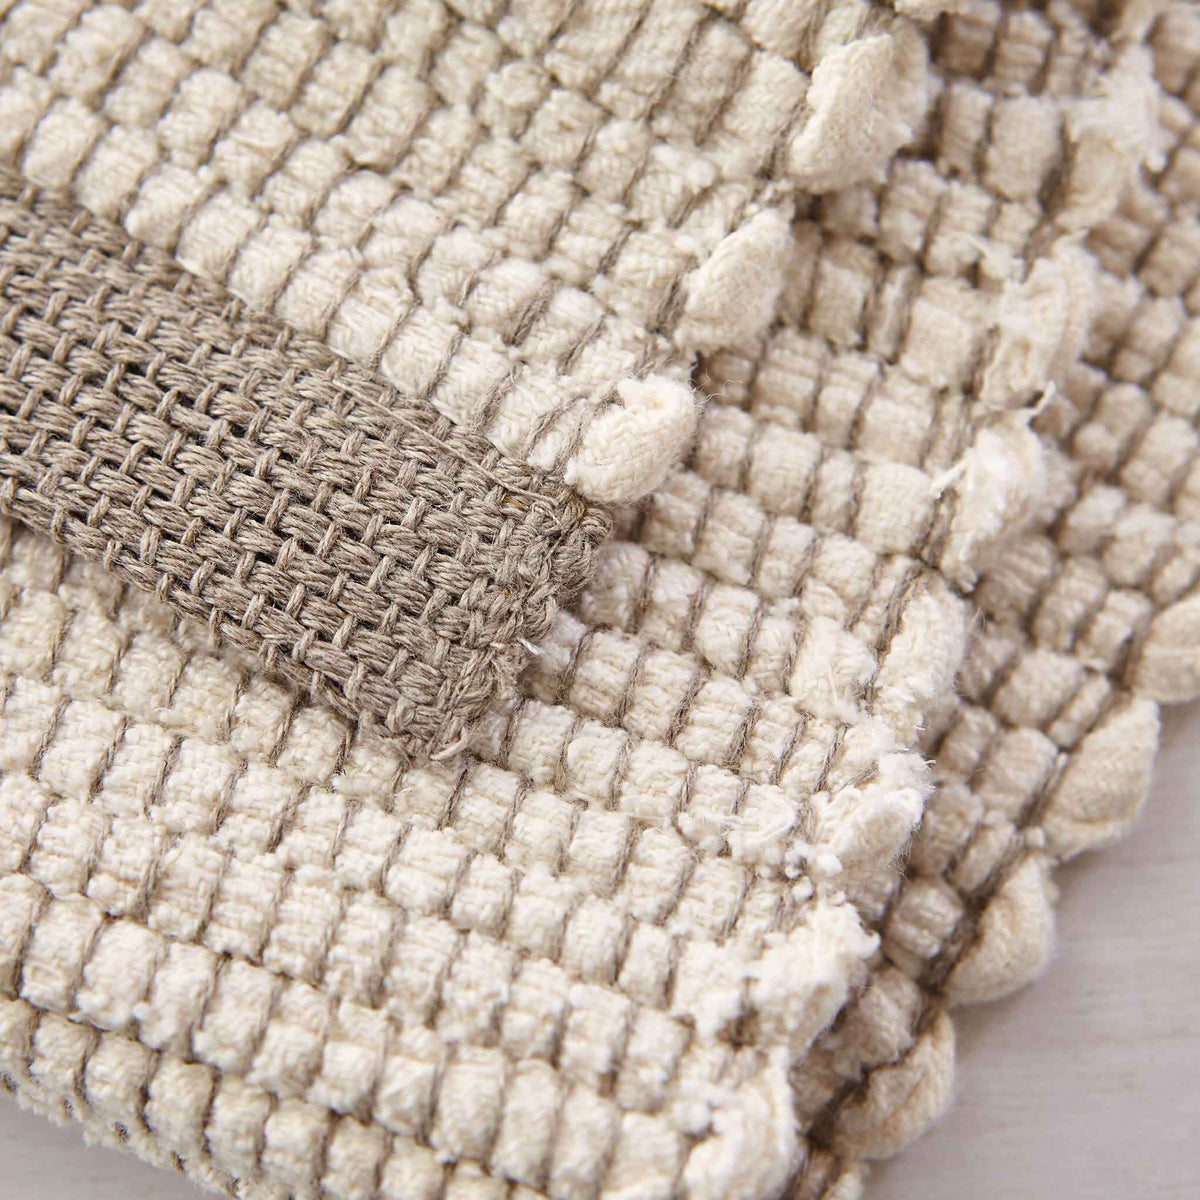 HANDWOVEN LINEN PLACEMAT-OYSTER with FLAX